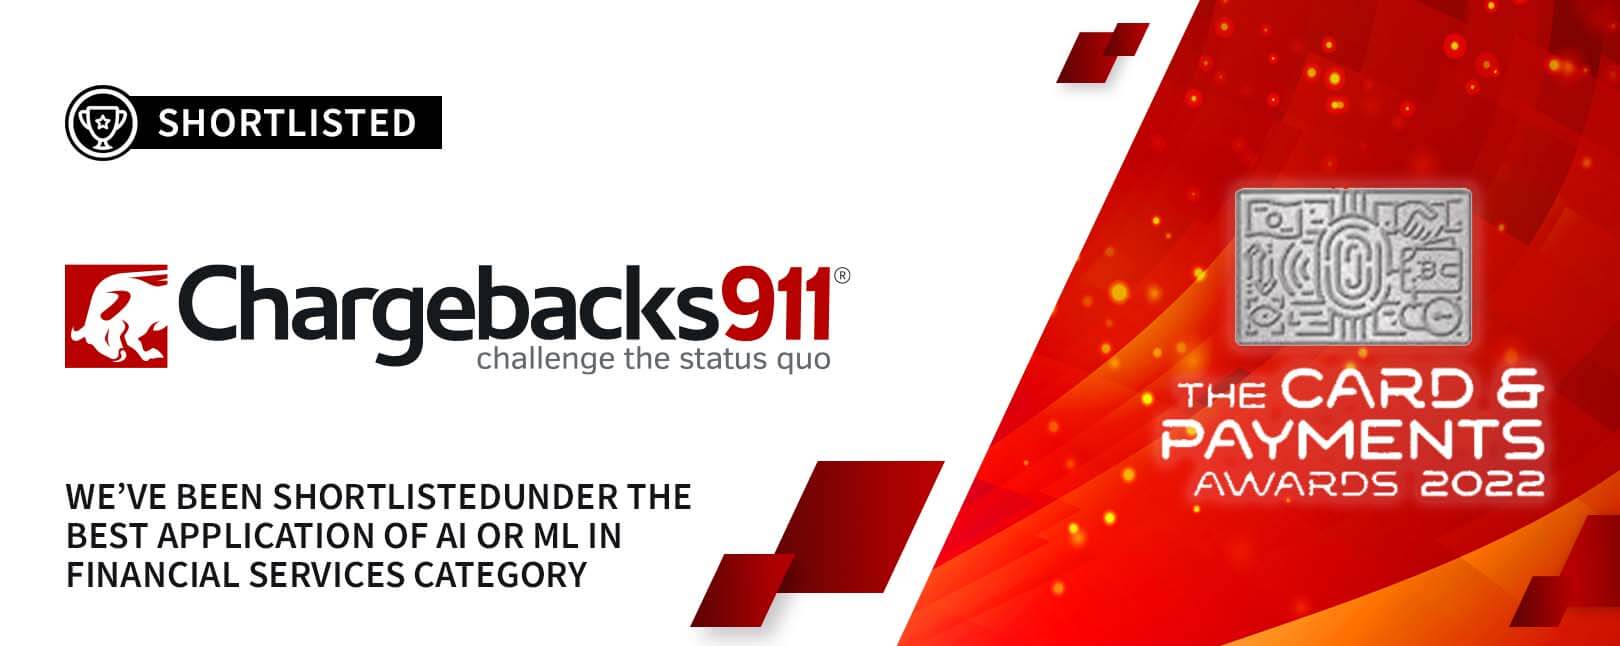 Chargebacks911® Nominated for 'Best Application of AI or ML in Financial Services' for 2022!